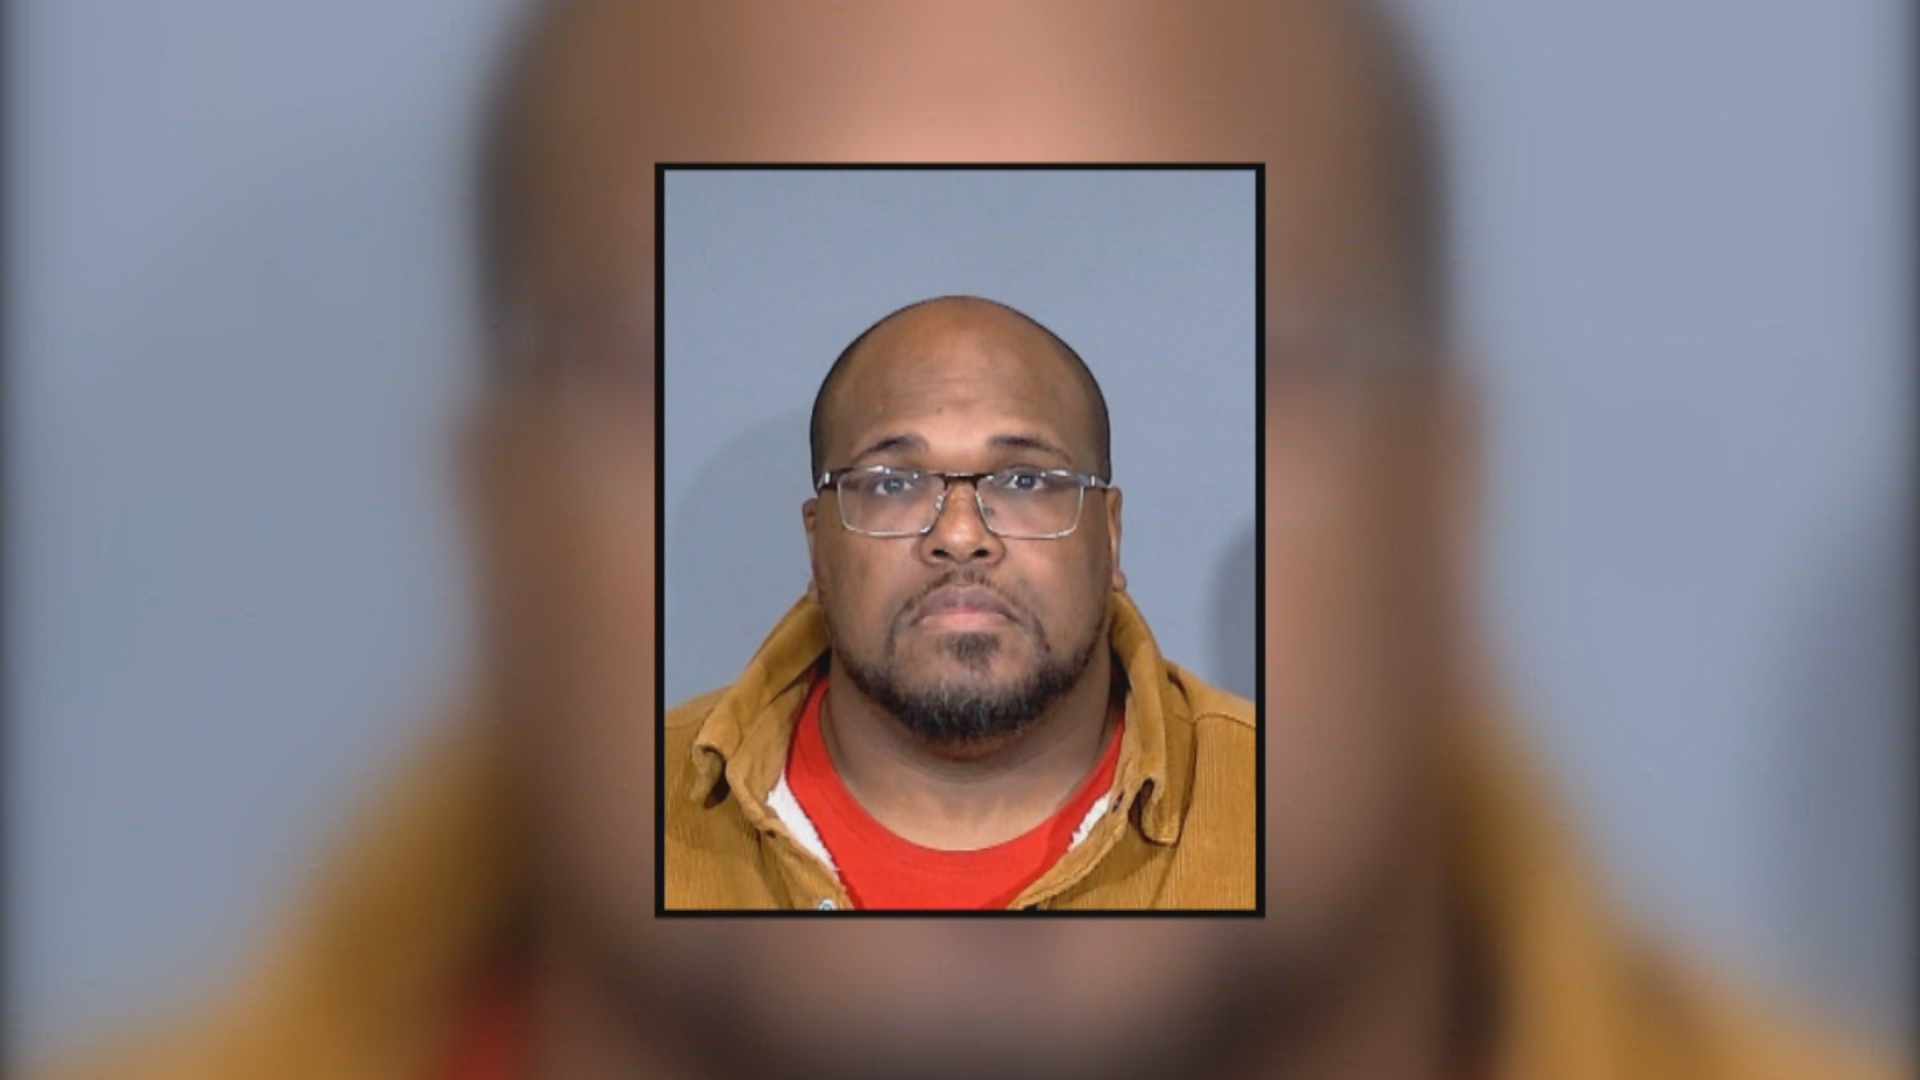 Indianapolis pastor accused of rape, using money to solicit teens